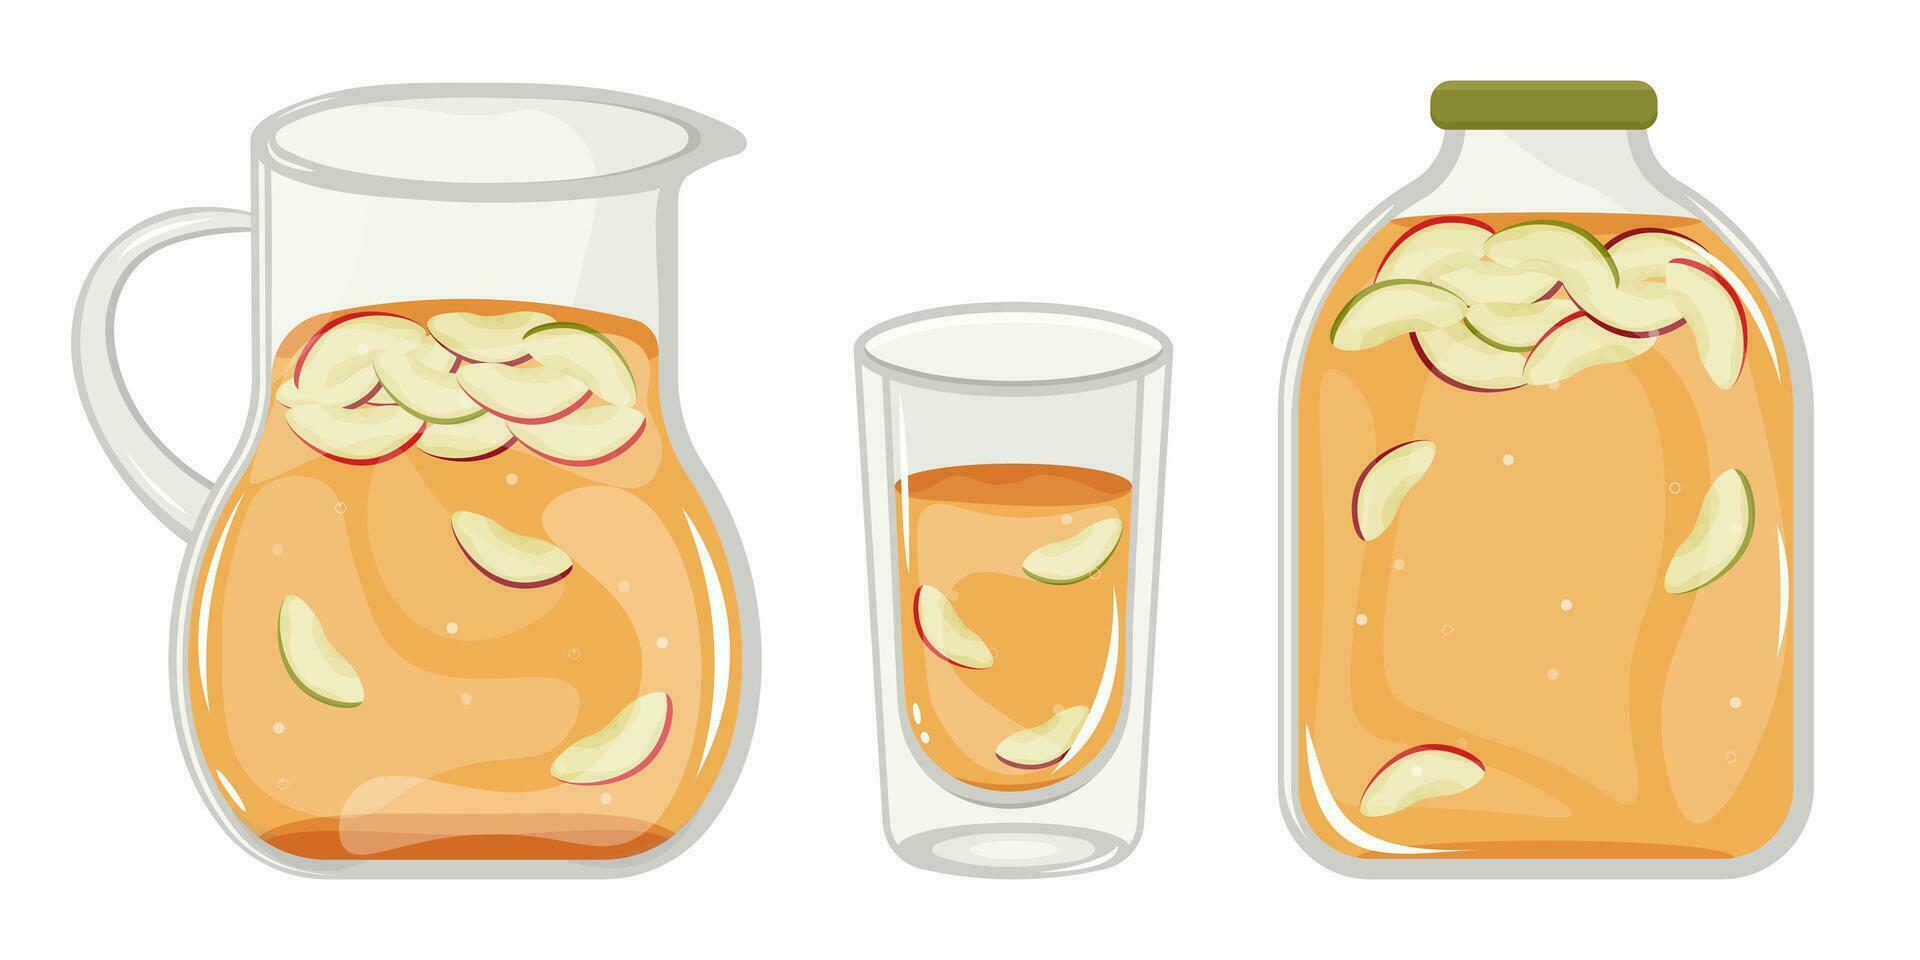 Homemade, canned, sweet, refreshing apple compote in a glass decanter, glass, jar. vector